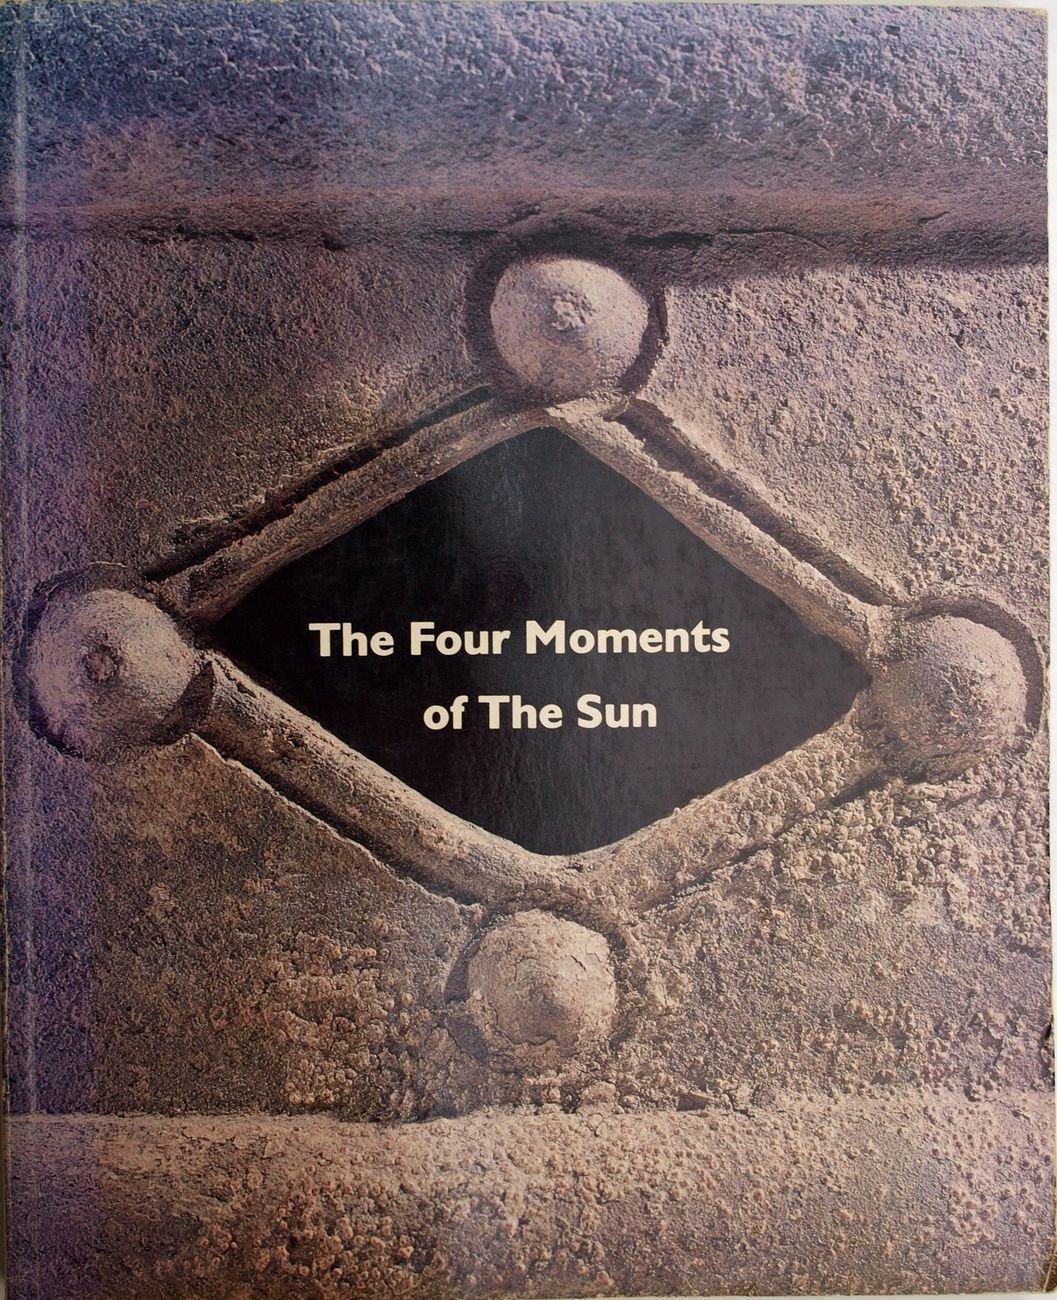 Il catalogo di "The Four Moments of the Sun" (National Gallery of Art, Washington, 1982)